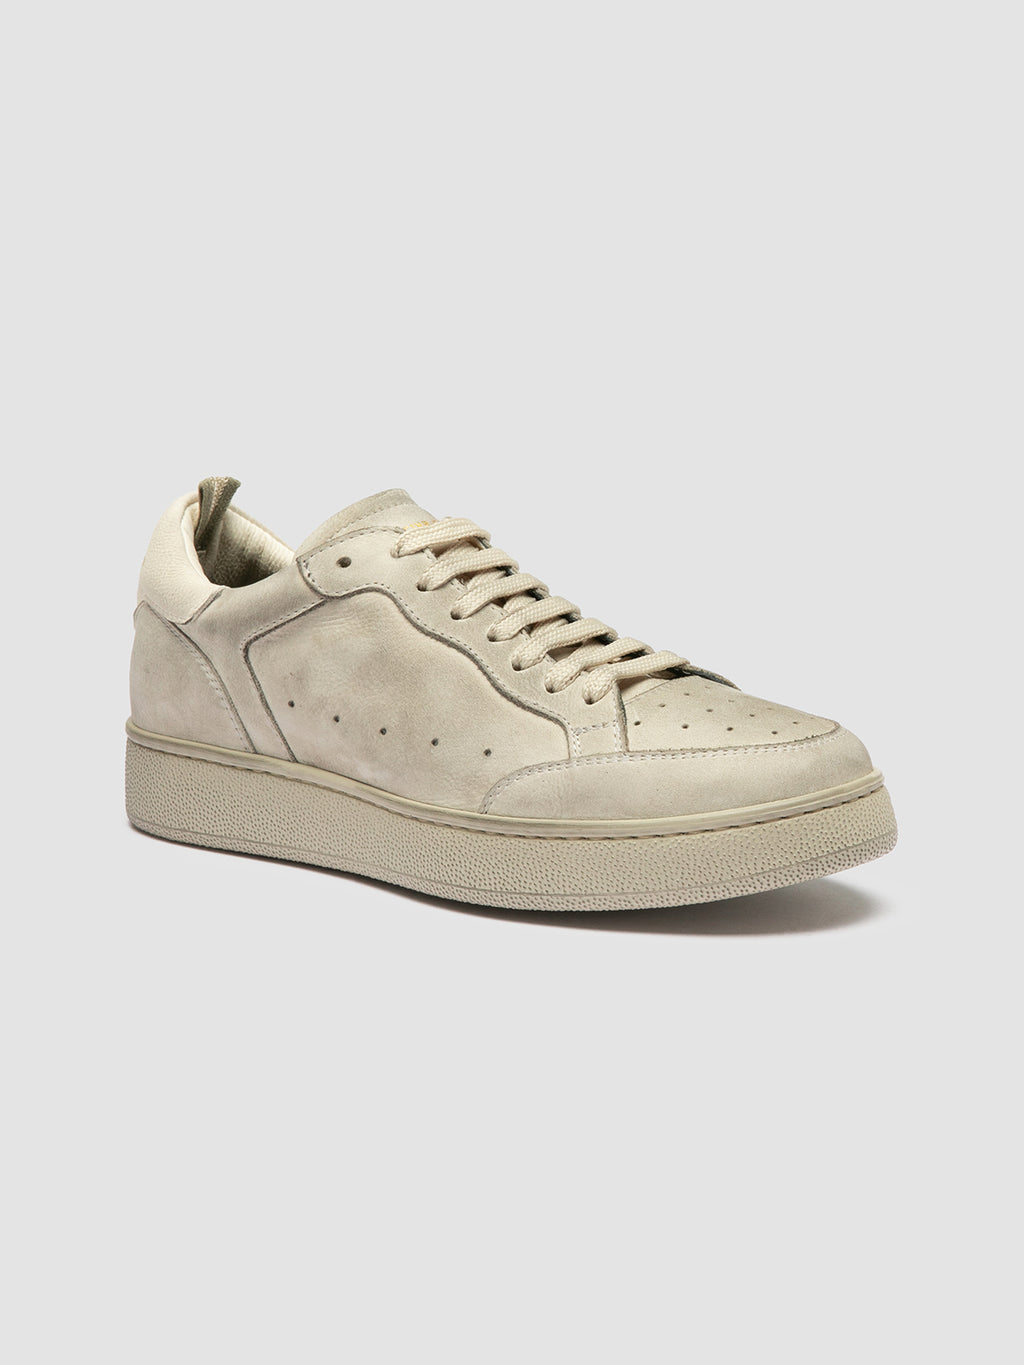 THE ANSWER 107 - Off White Nubuck Low Top Sneakers